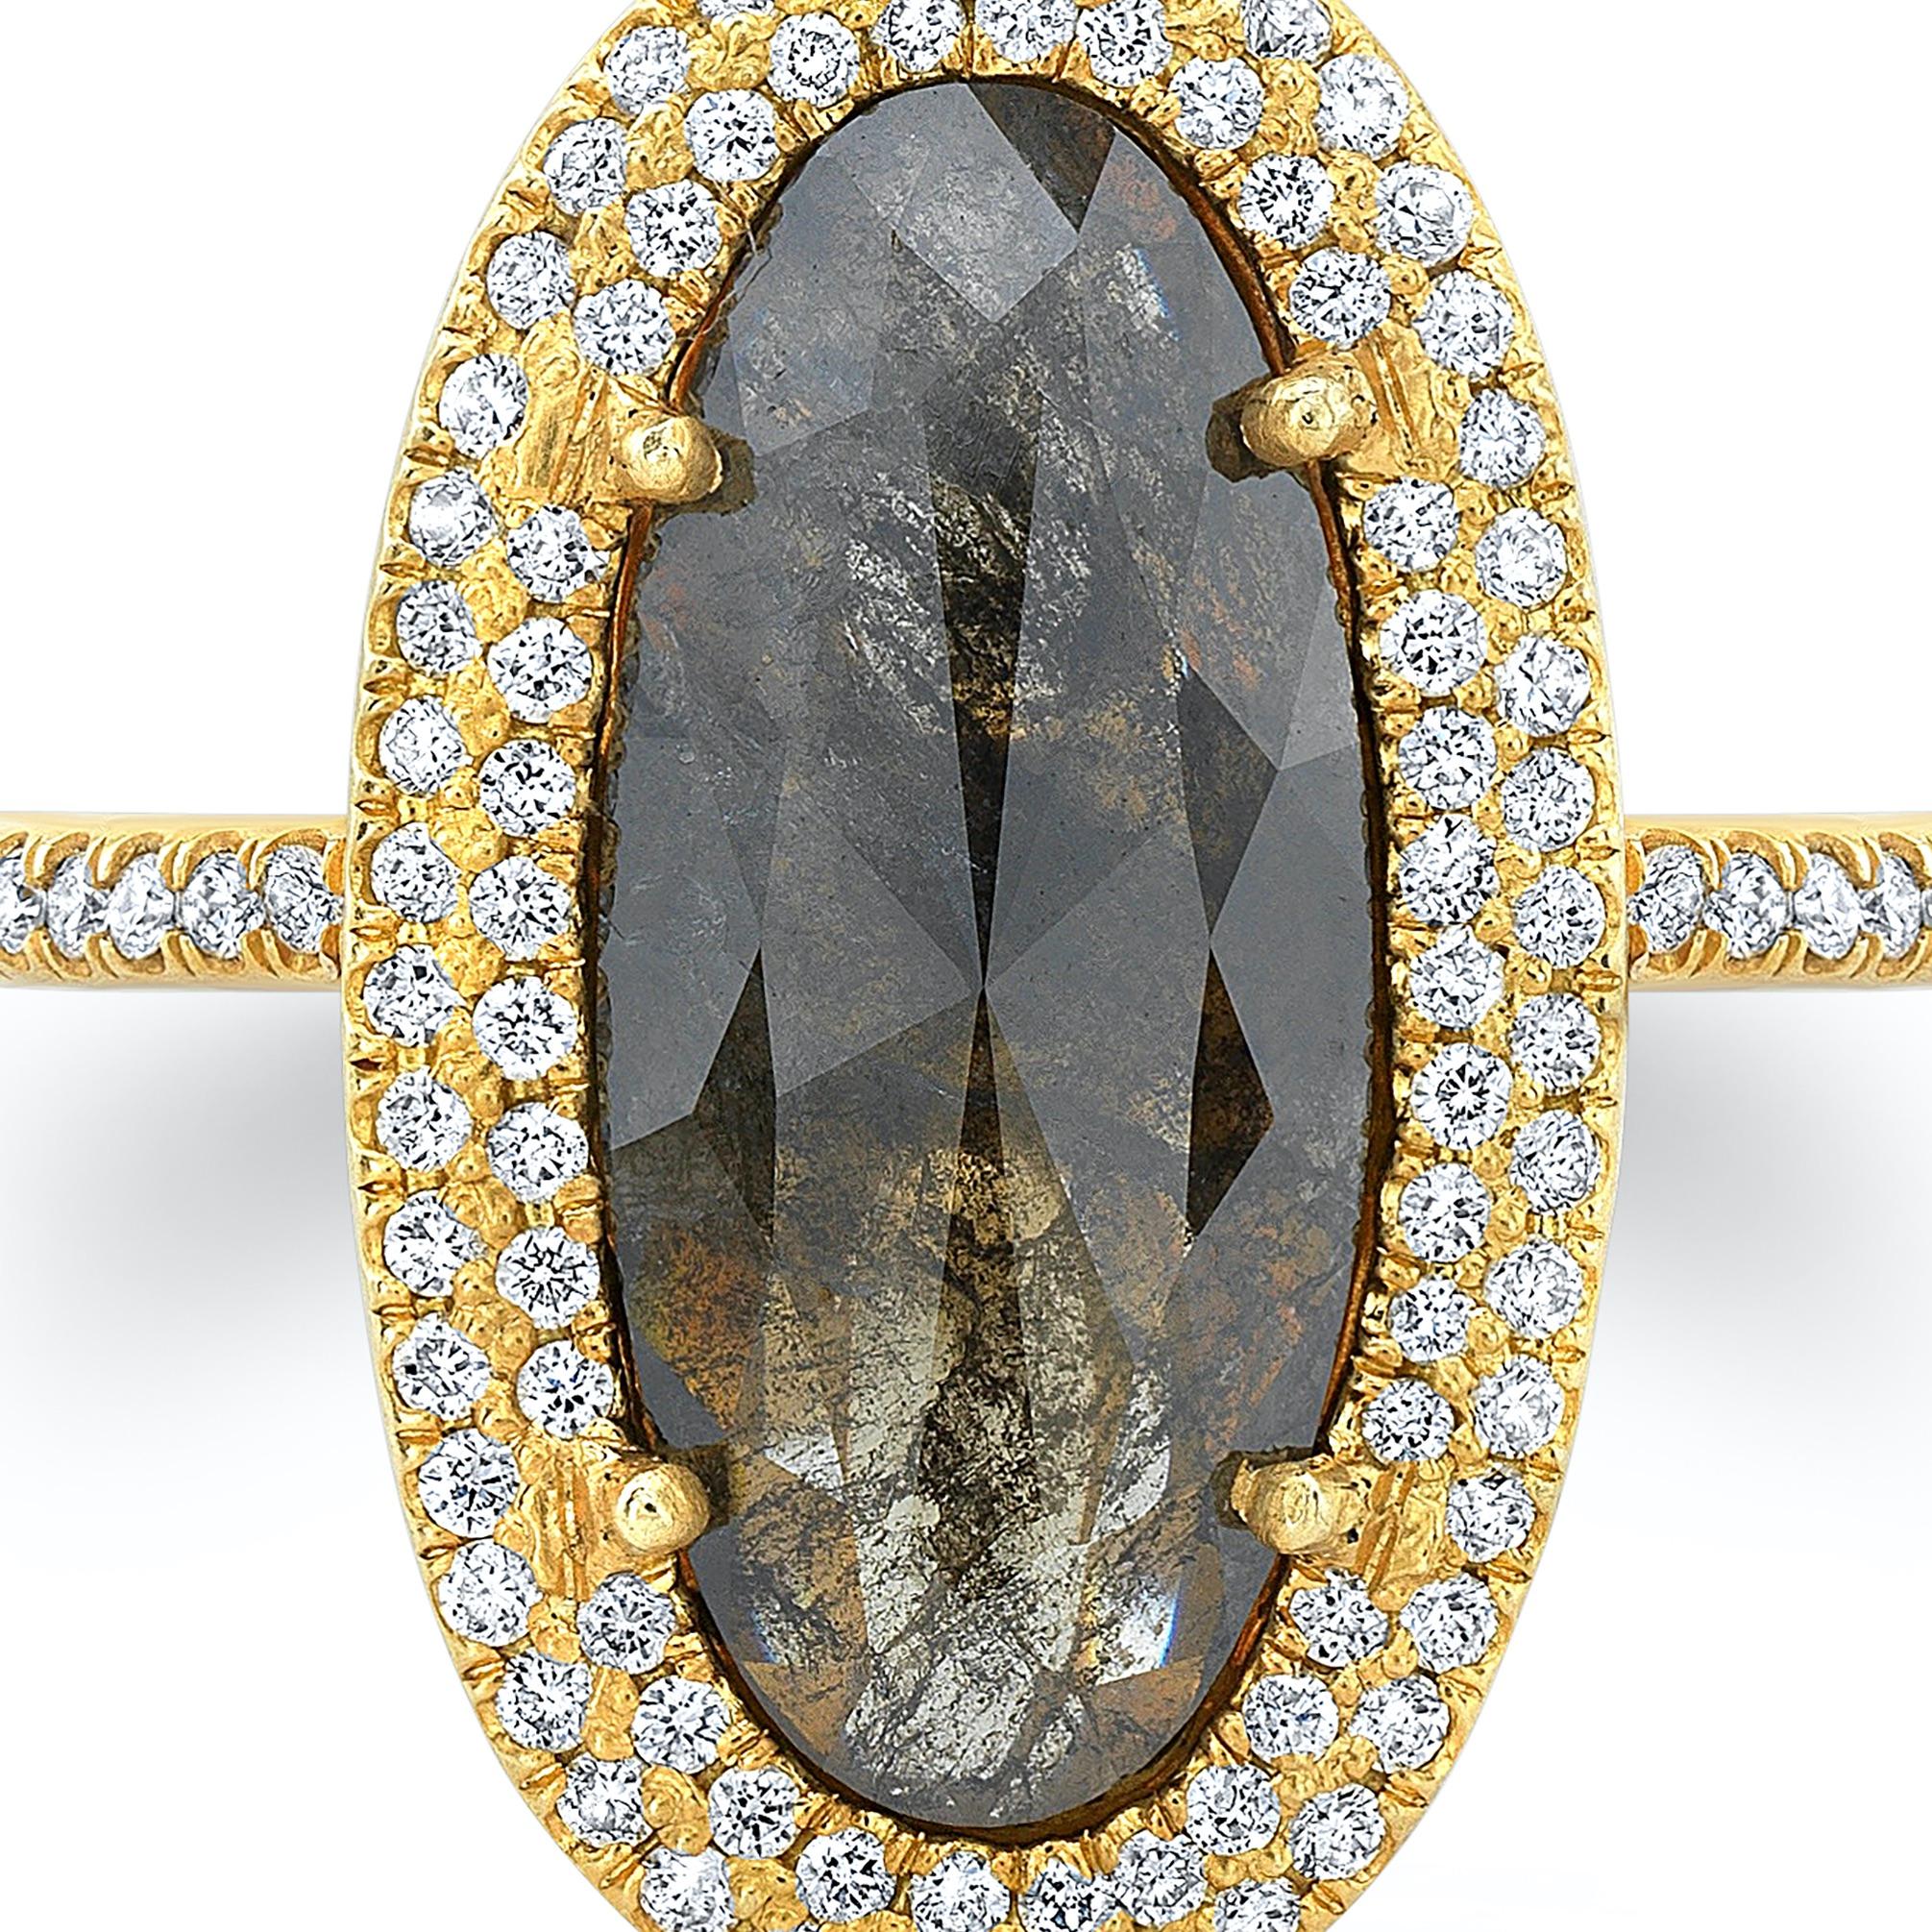 2.07ct Balck & Brown Elongated Oval Diamond Slice Ring with .43ct Diamond Pave and partial Diamond Pave band in 18k Matte Finish Yellow Gold. Diamonds go 2/3 around the band  size 6 1/2. Handmade in Los Angeles. All Diamonds are ethically sourced.